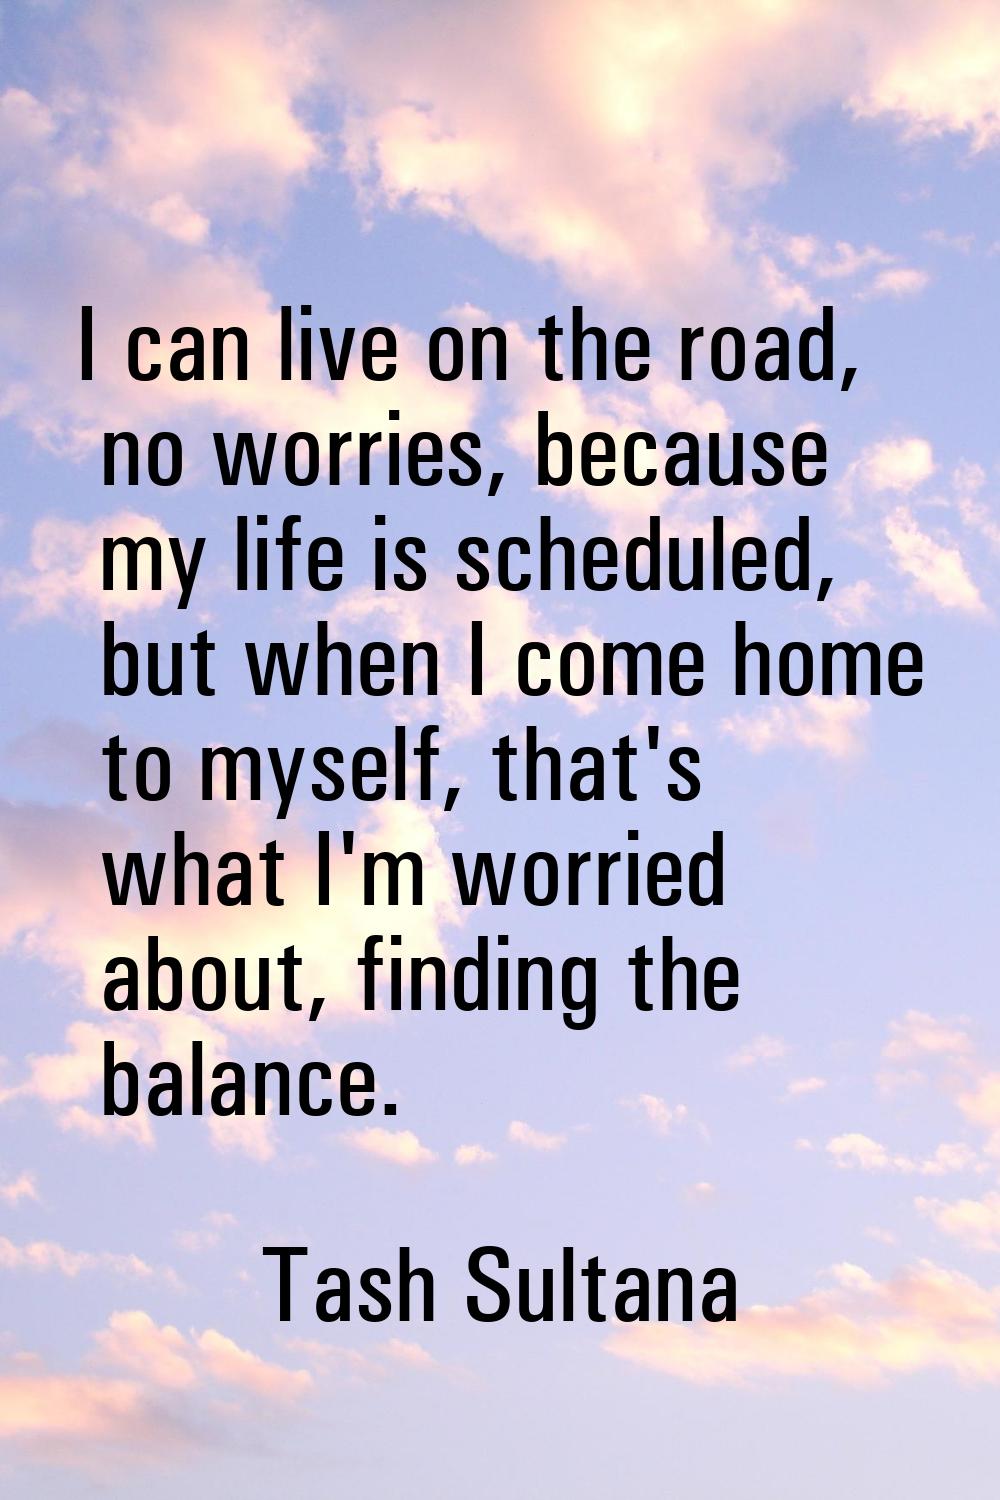 I can live on the road, no worries, because my life is scheduled, but when I come home to myself, t